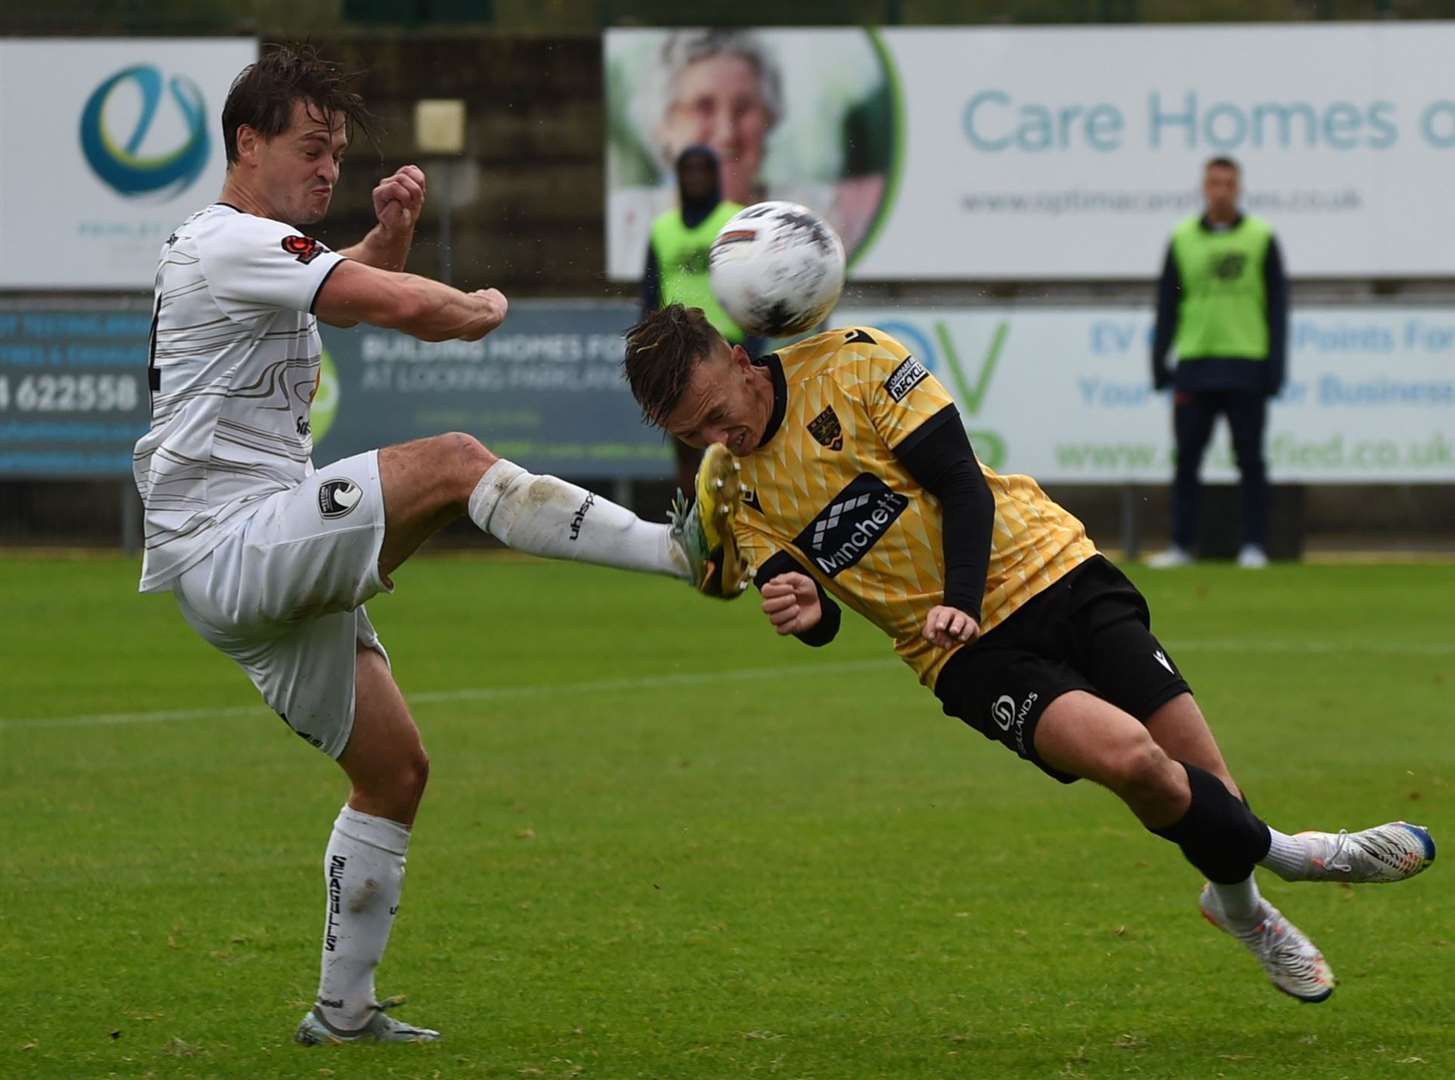 Maidstone United midfielder Sam Corne receives a whack during the 1-1 National League South draw at Weston Picture: Steve Terrell